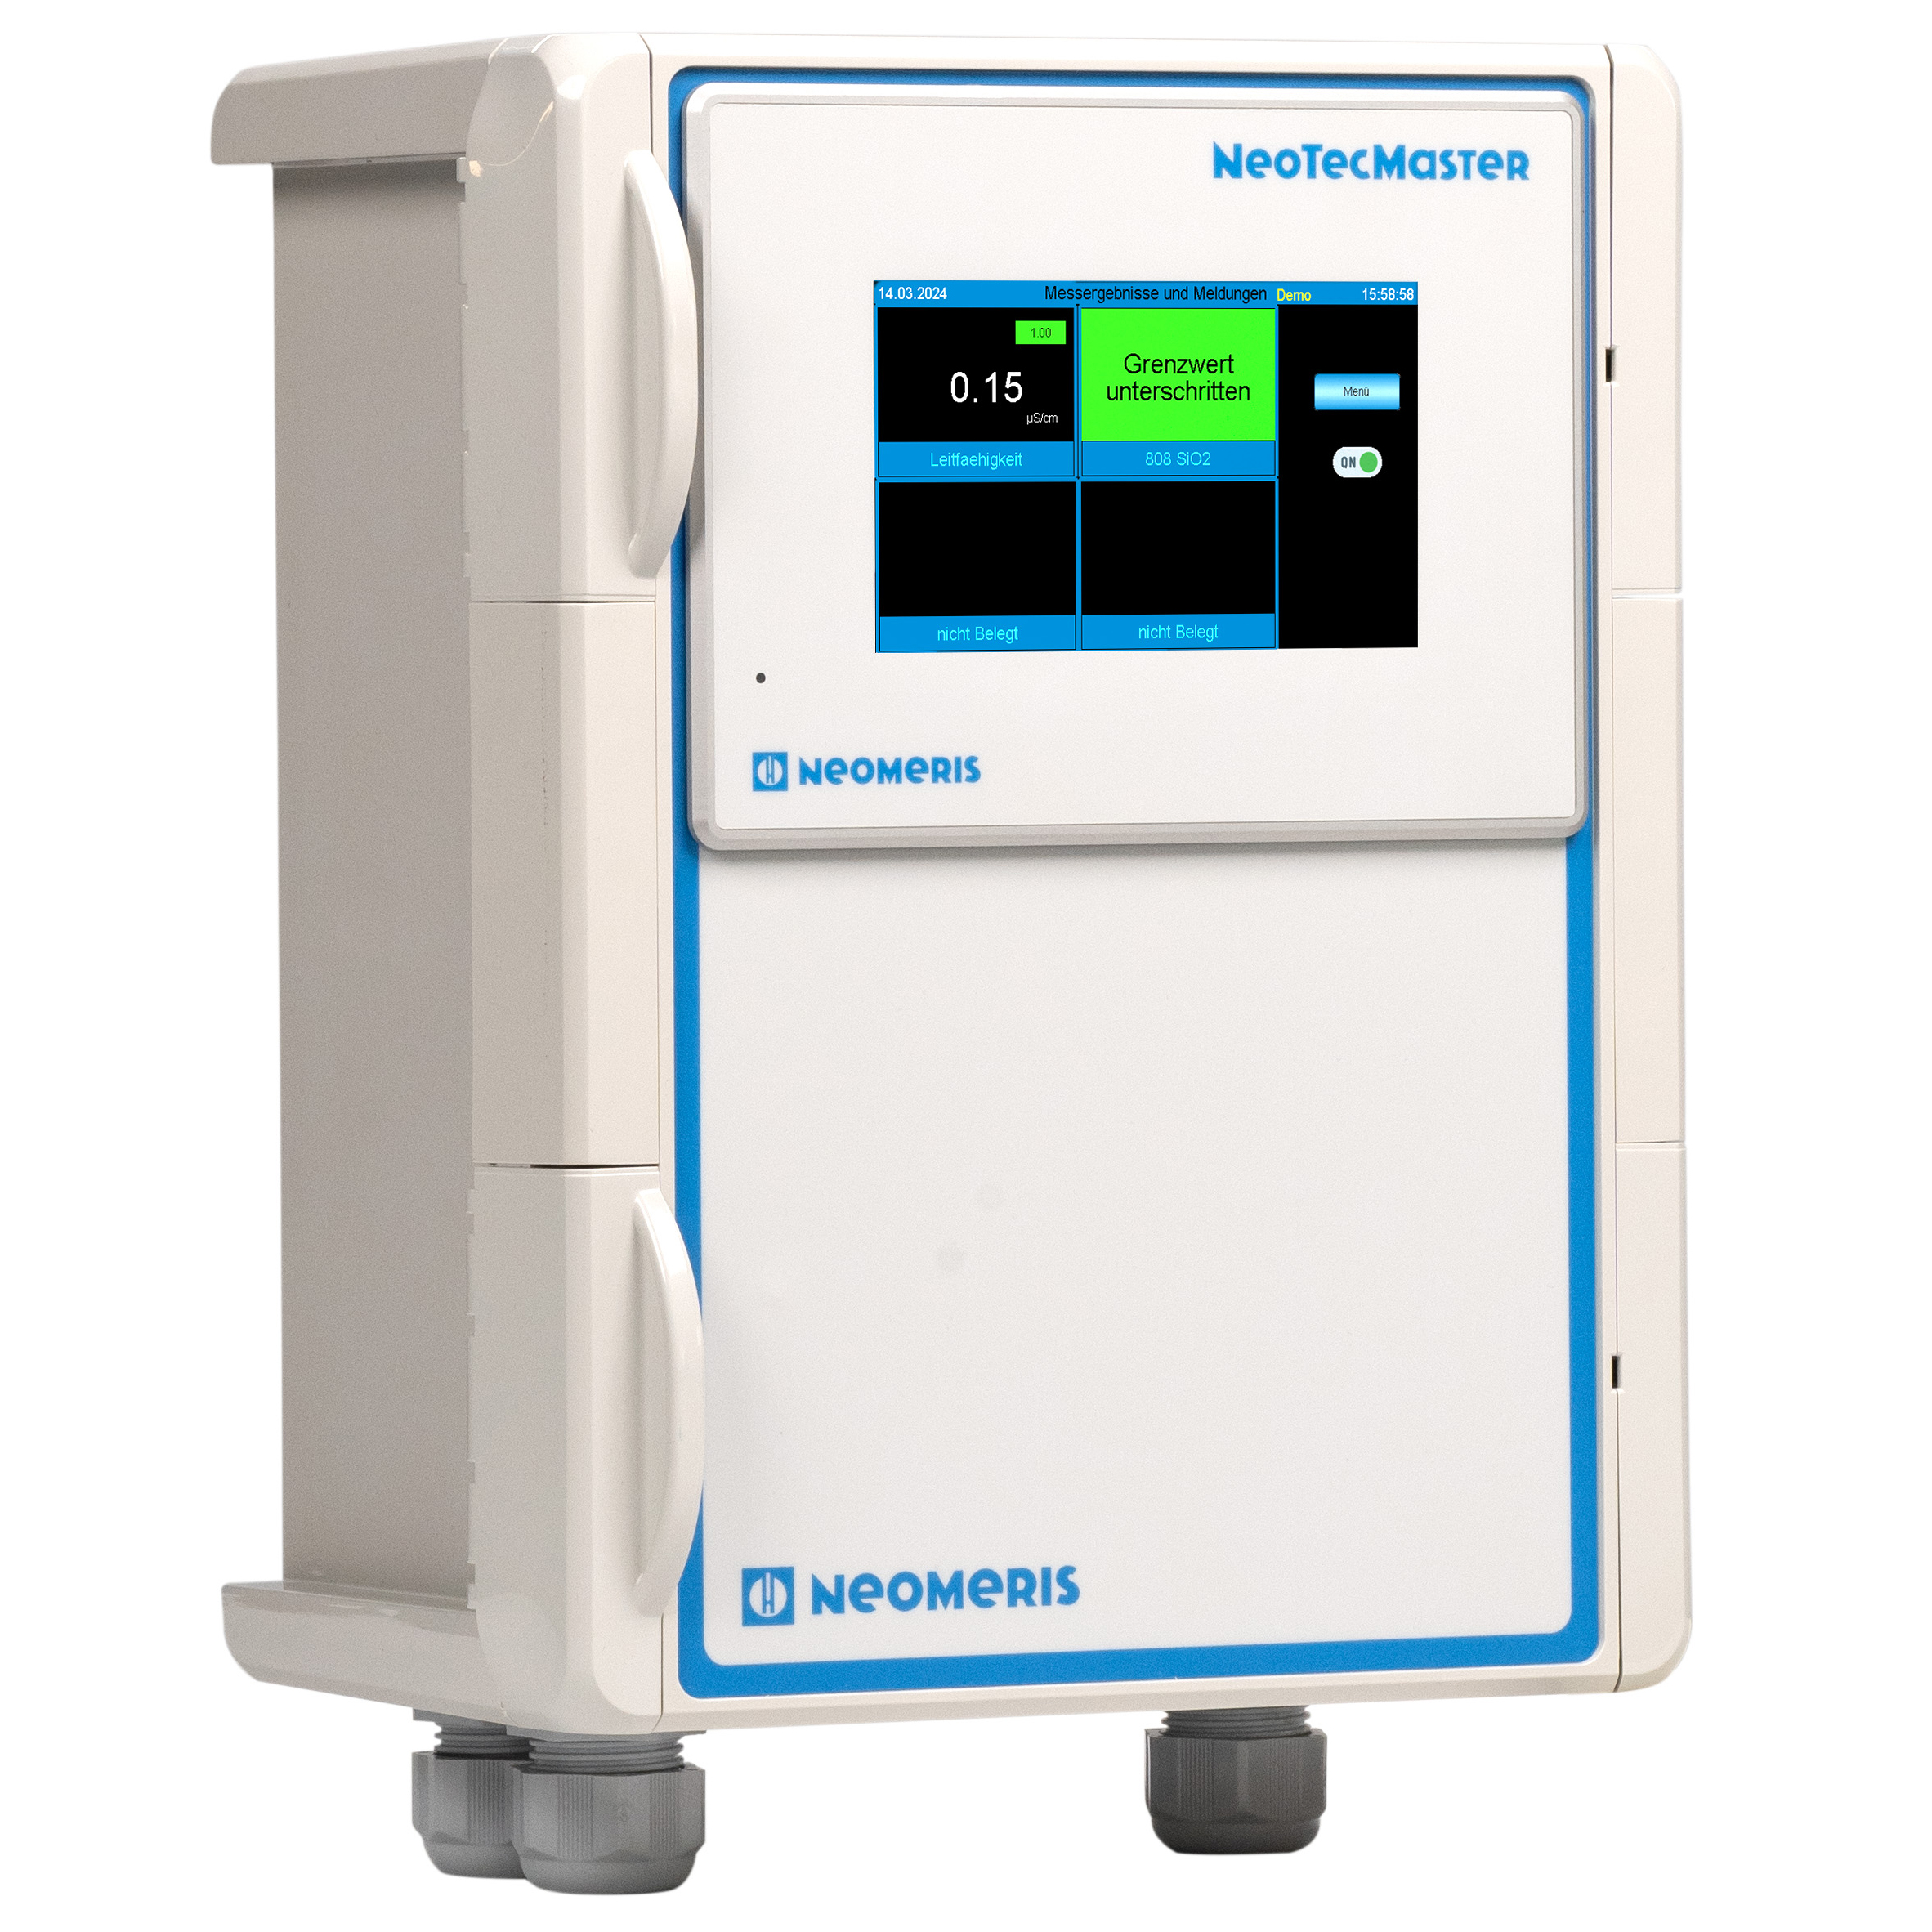 NeoTecMaster® – 5 inch in IP 66 housing as a 4-channel system, preconfigured to accept up to 8 incoming 4-20 mA signals, one R232 signal and Modbus signal, can be optionally enabled for 8 channels